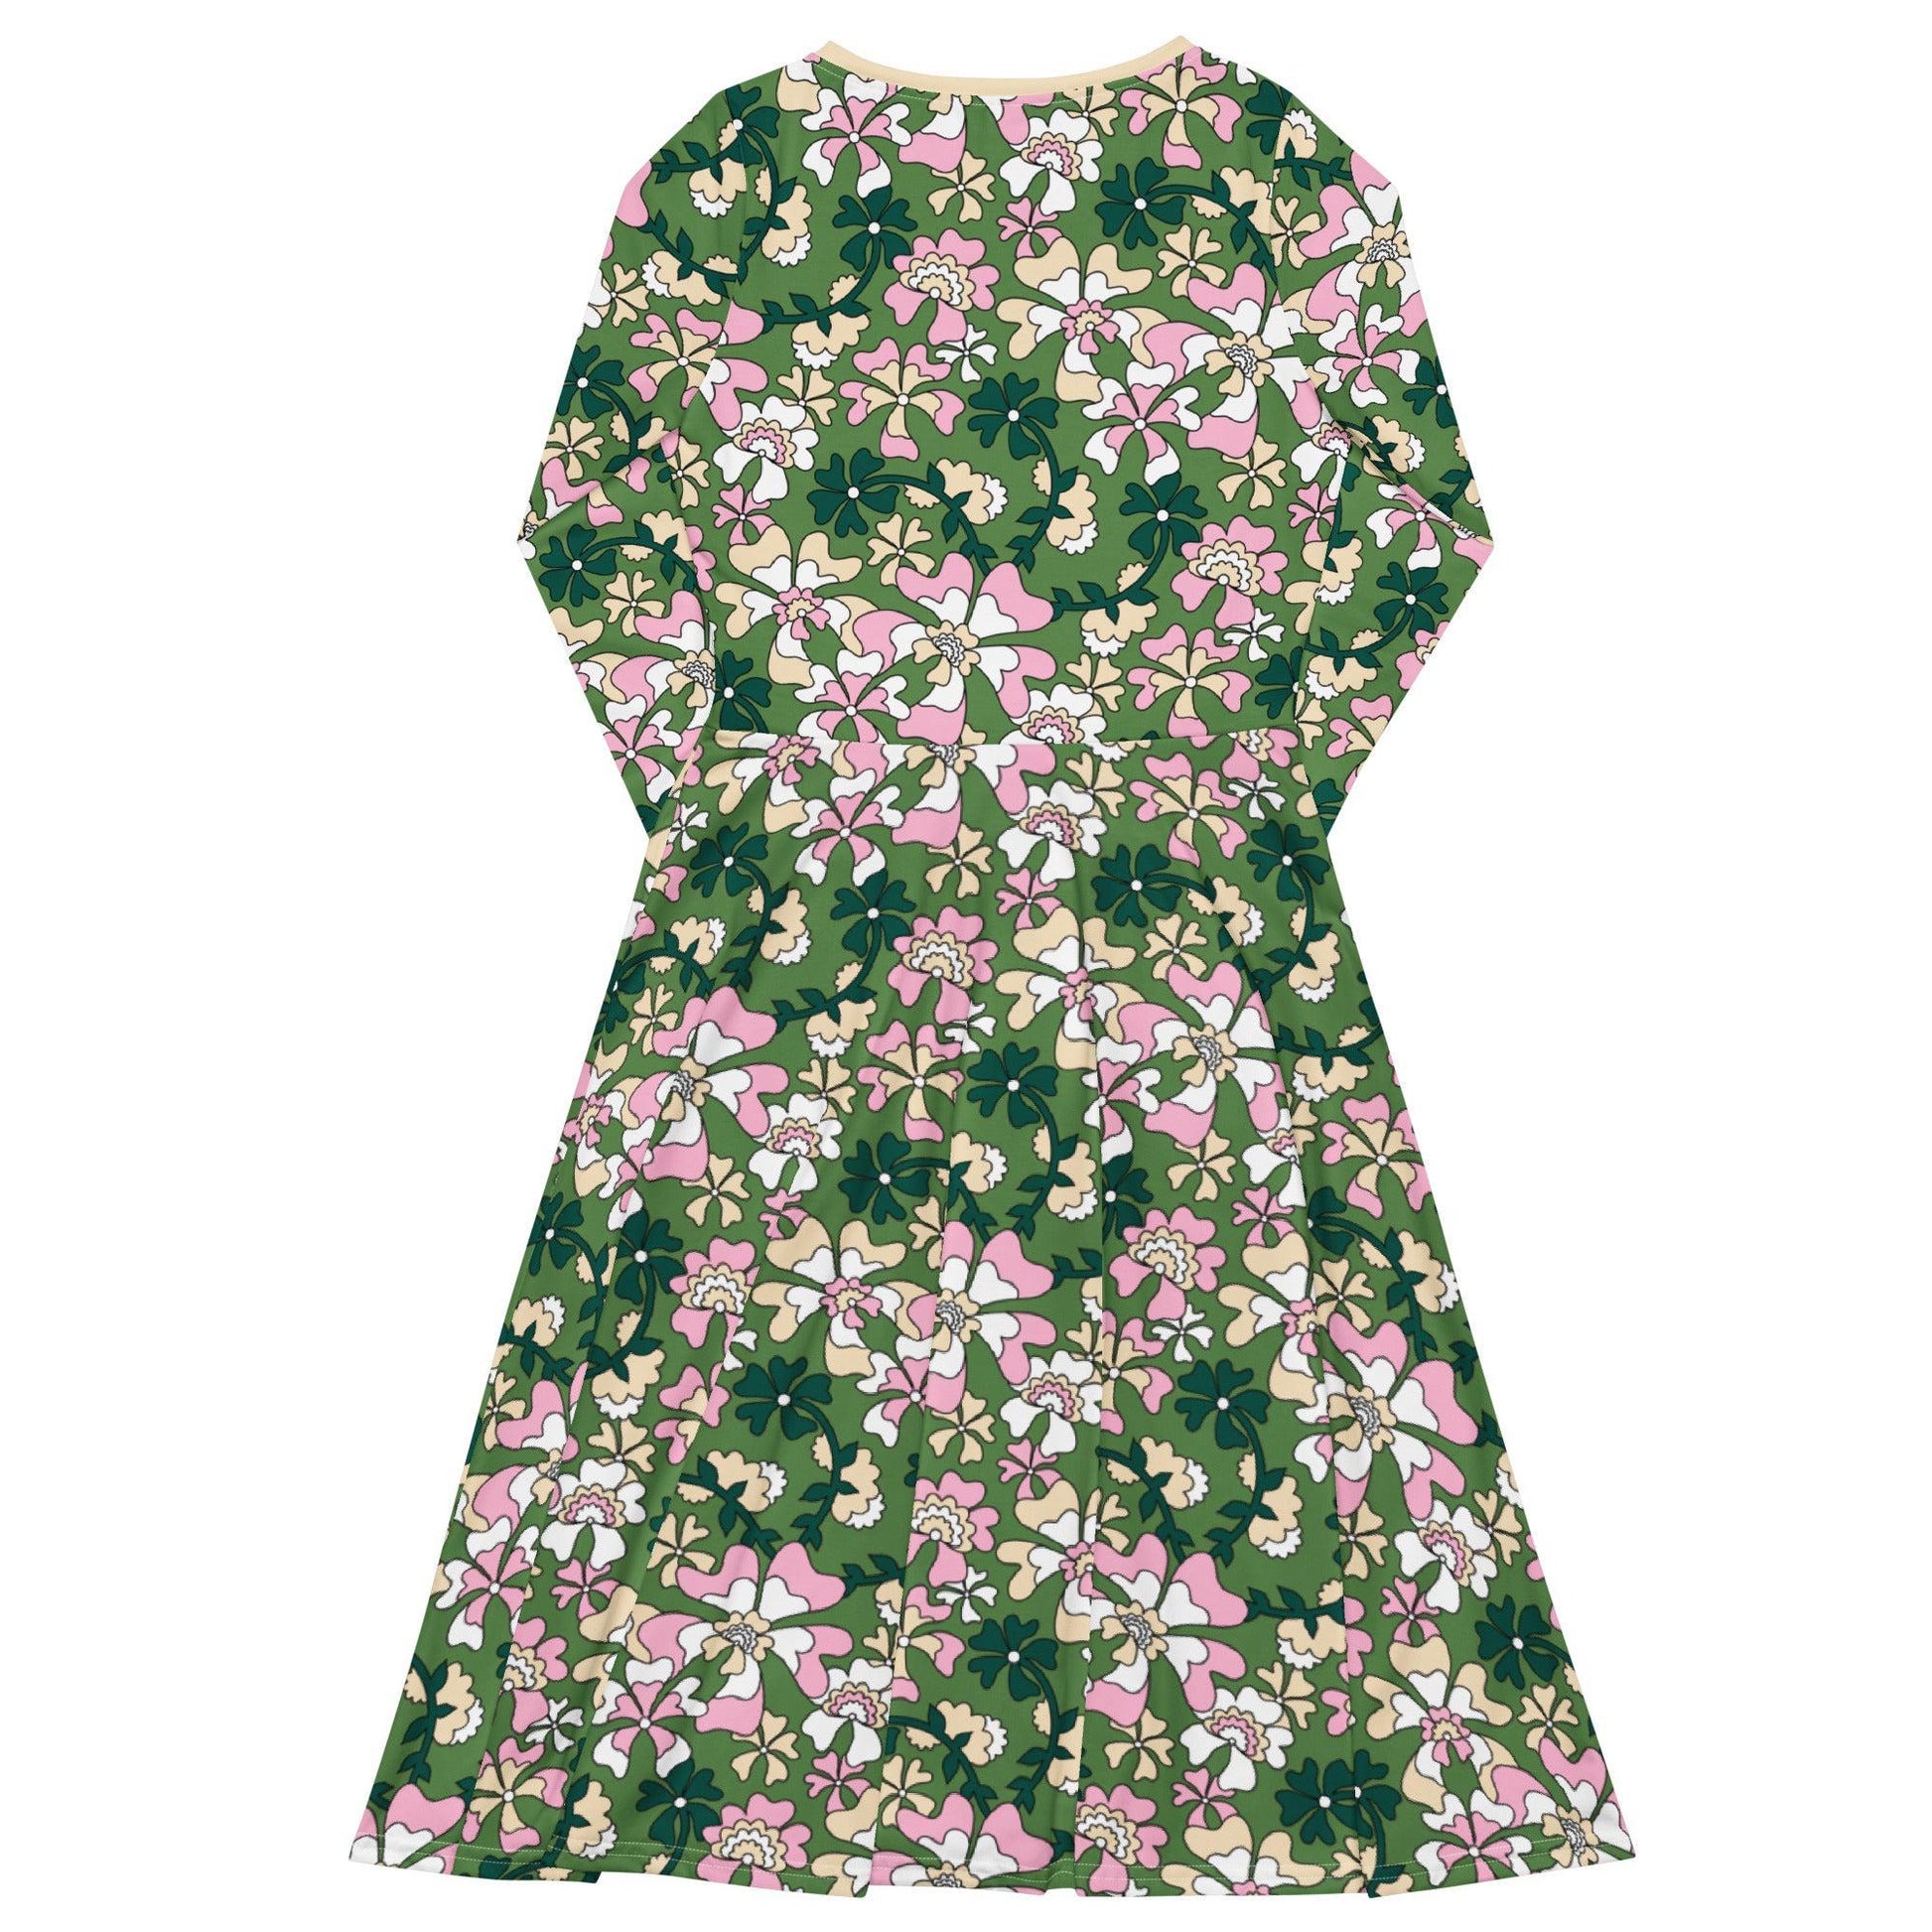 MISS PENNY green - Midi dress with long sleeves and handy pockets